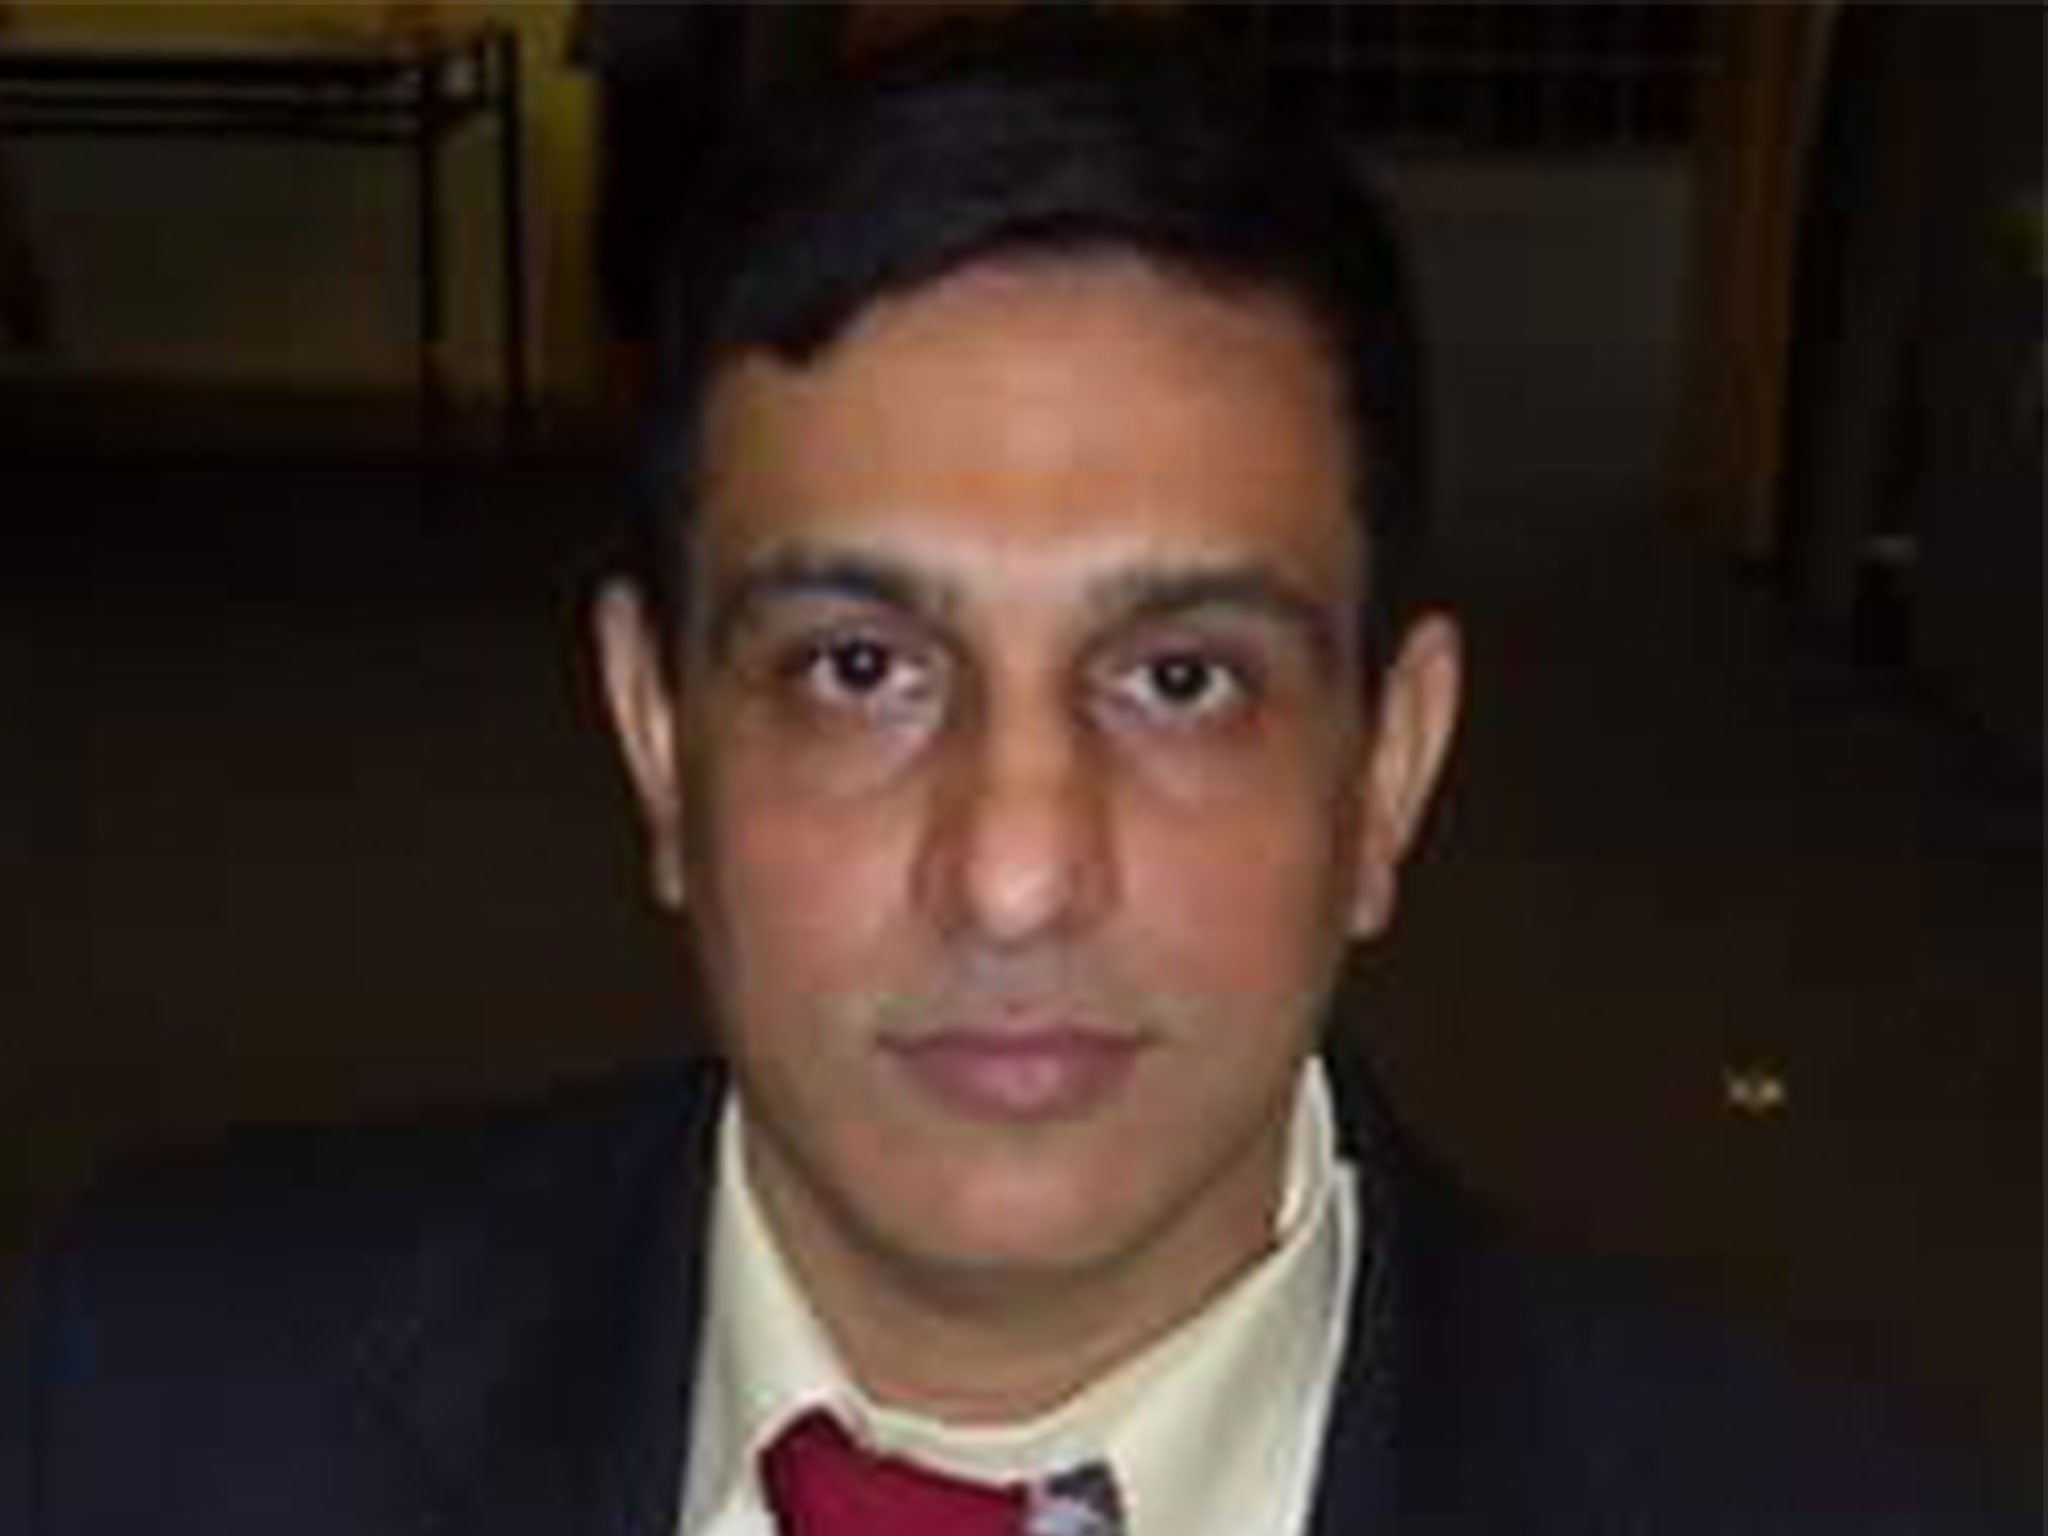 Vijaykumar Patel died after he suffered a head injury when he was attacked at work